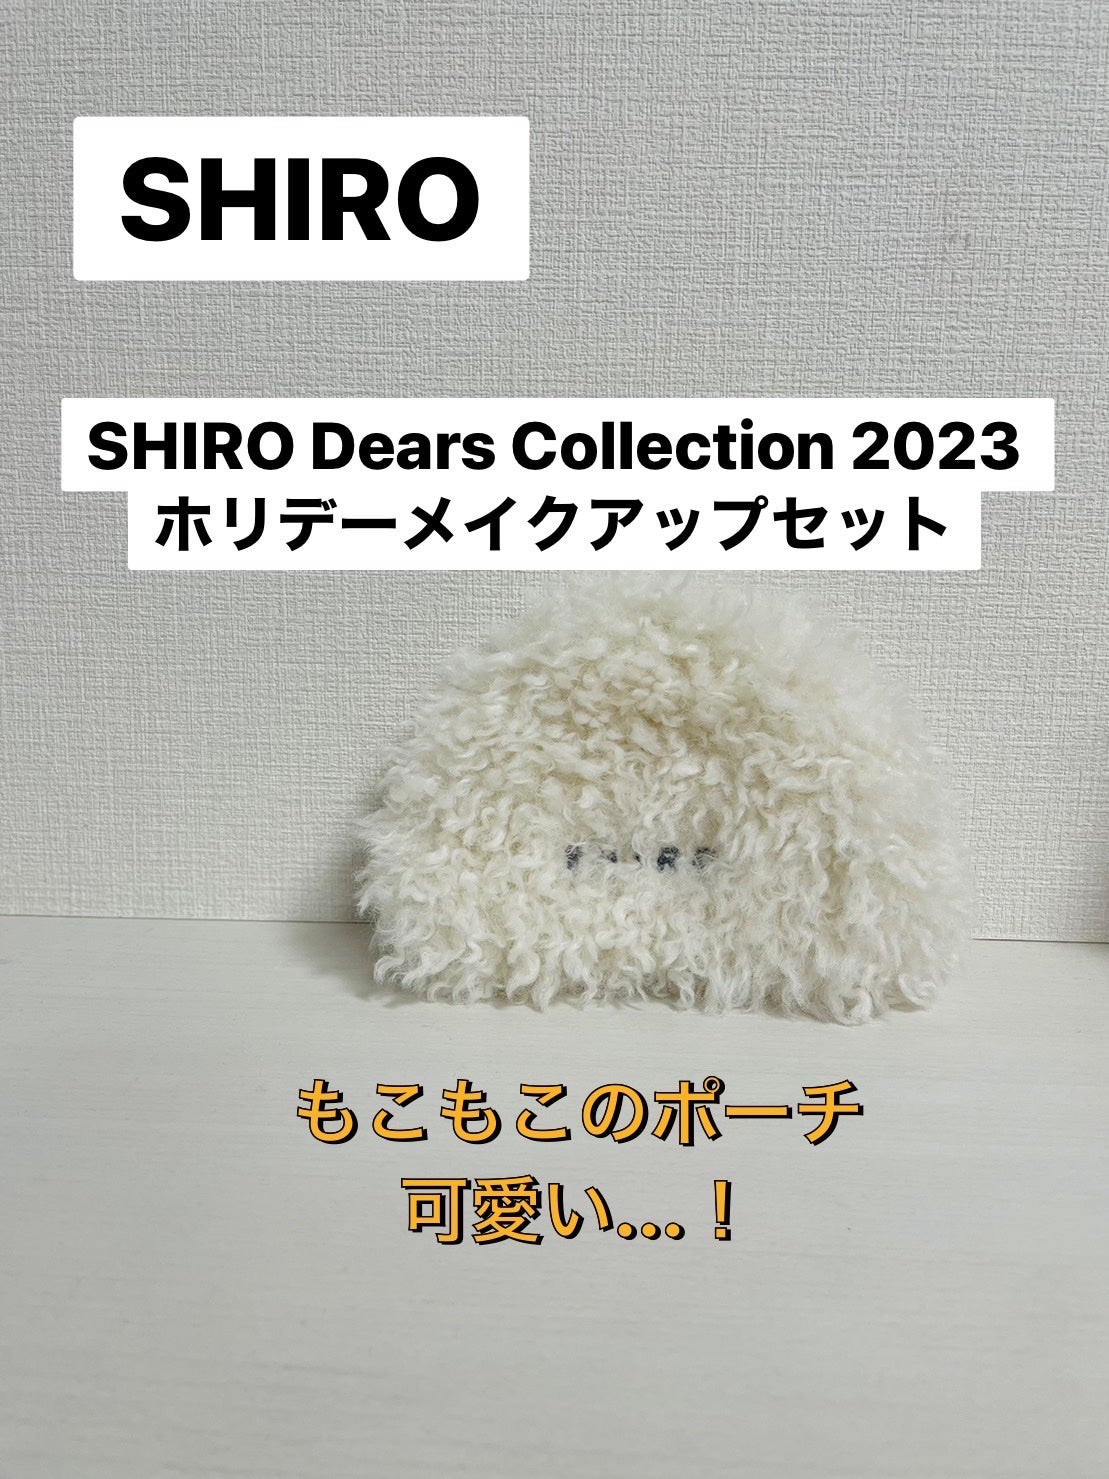 SHIRO Dears Collection 2023 ホリデーメイクアップセット Yahoo